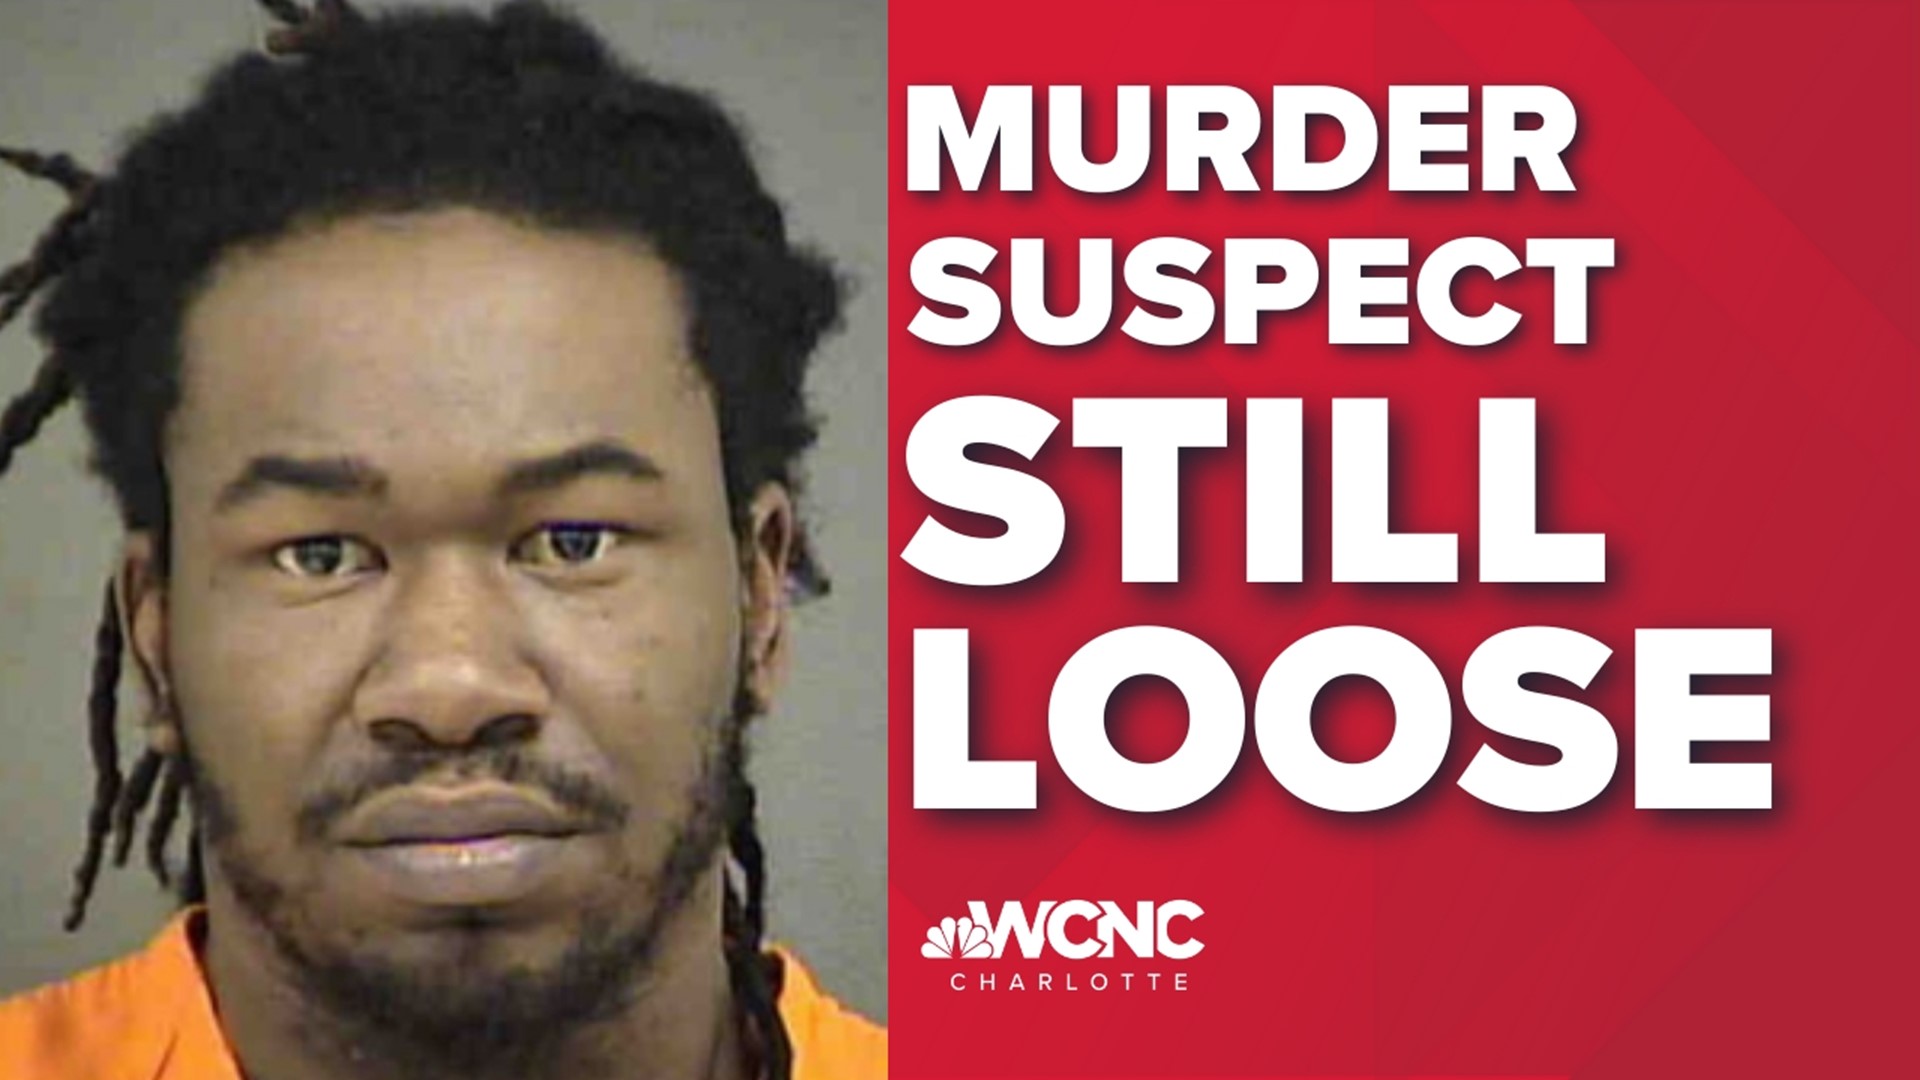 CMPD searching for murder suspect, Charlotte, NC news